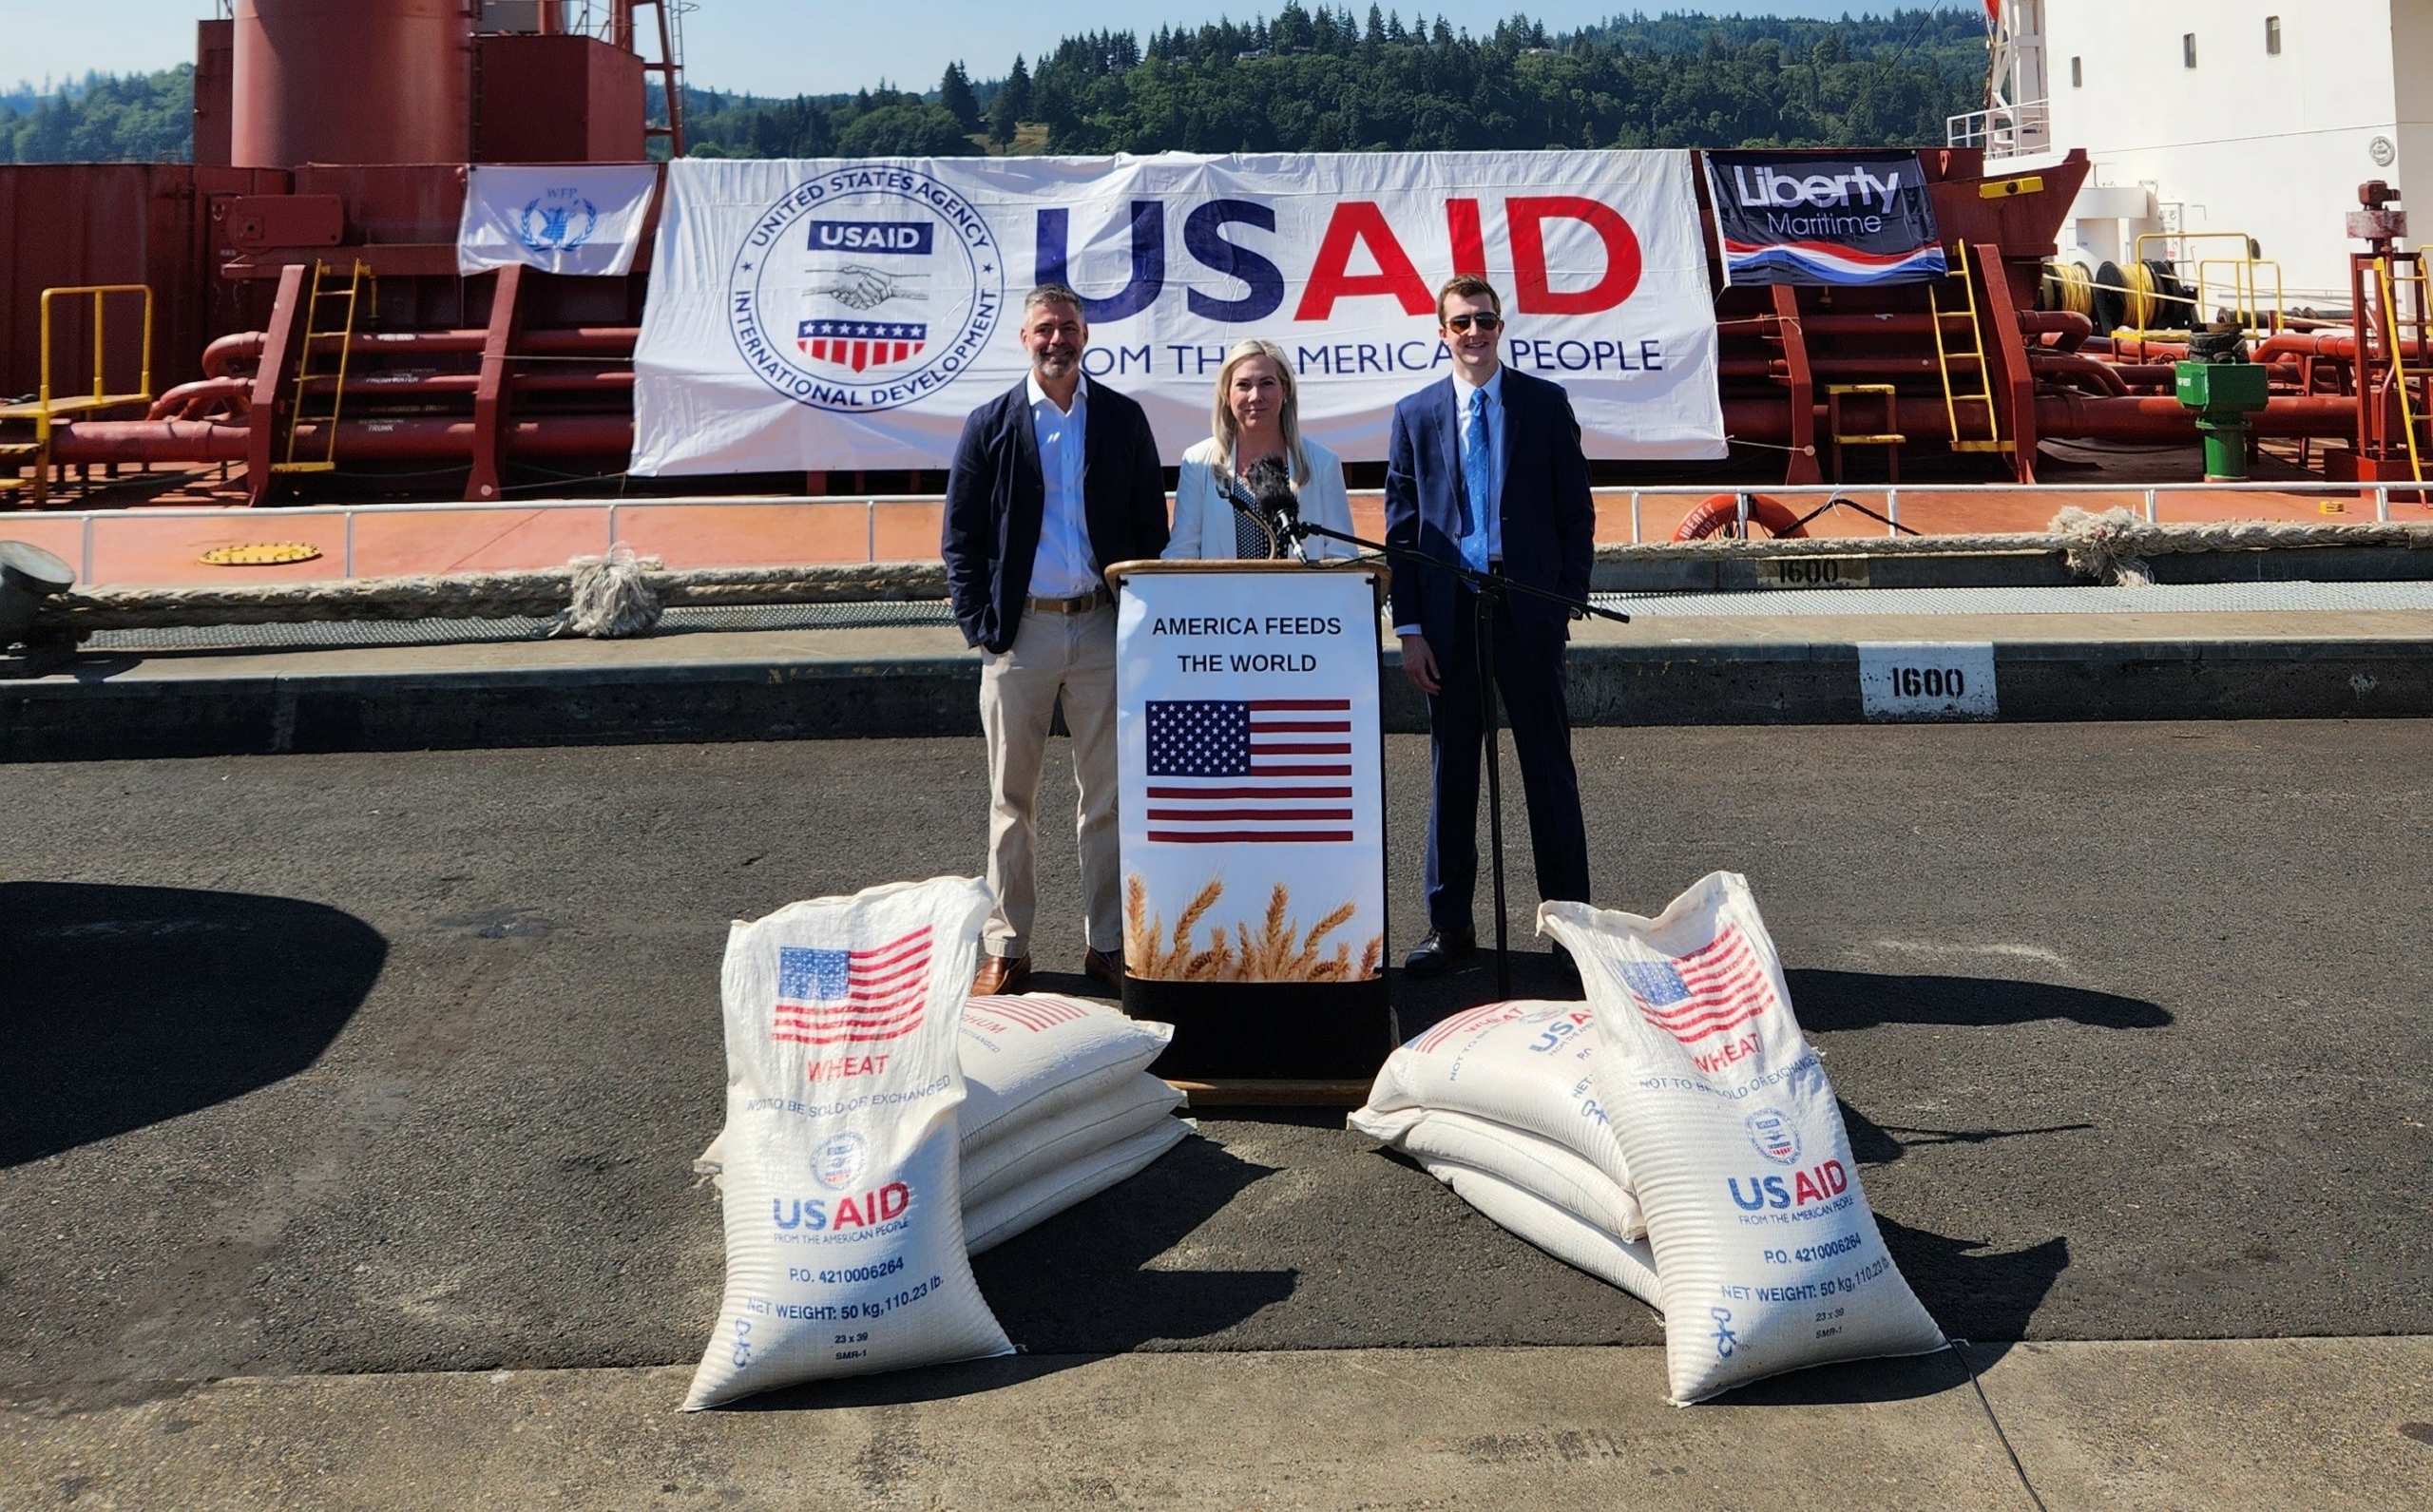 Three people stand at a podium on the dock of a grain export elevator with a sign saying USAID on a ship behind them and bags of wheat marked "USAID: Donated by the American People".